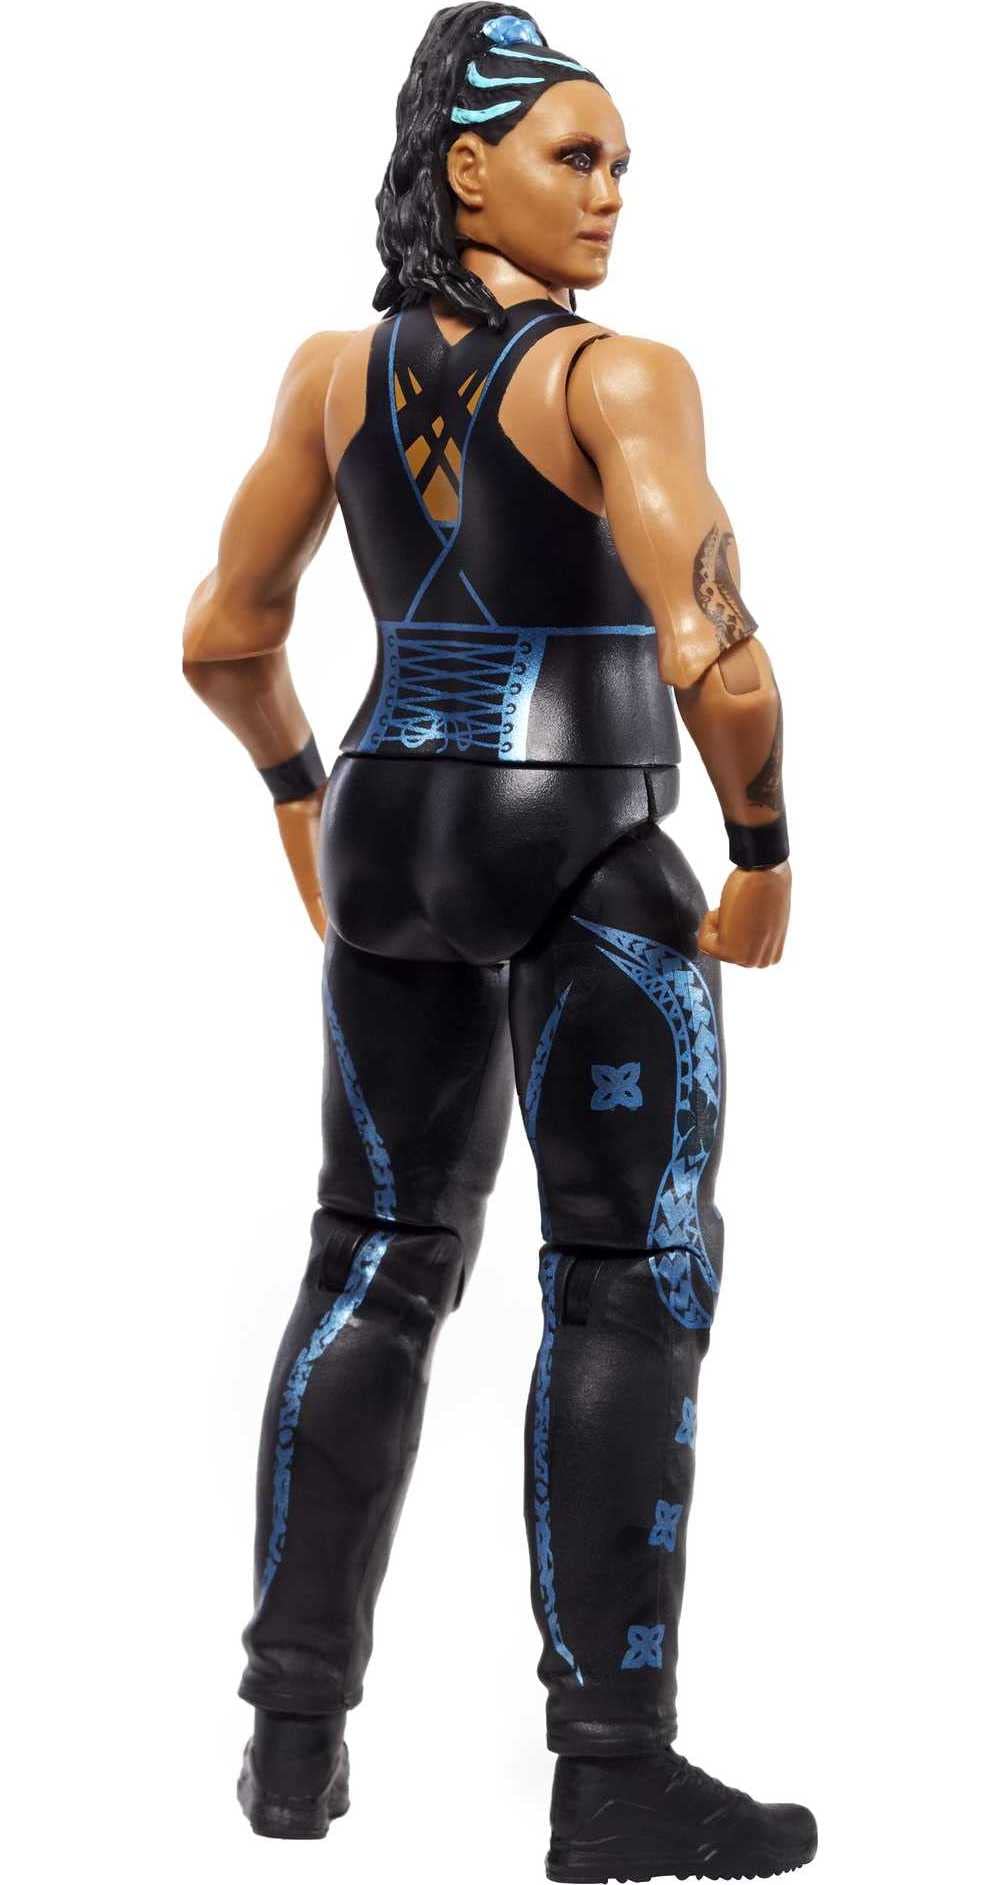 Mattel WWE Basic Tamina Action Figure, Posable 6-inch Collectible for Ages 6 Years Old & Up